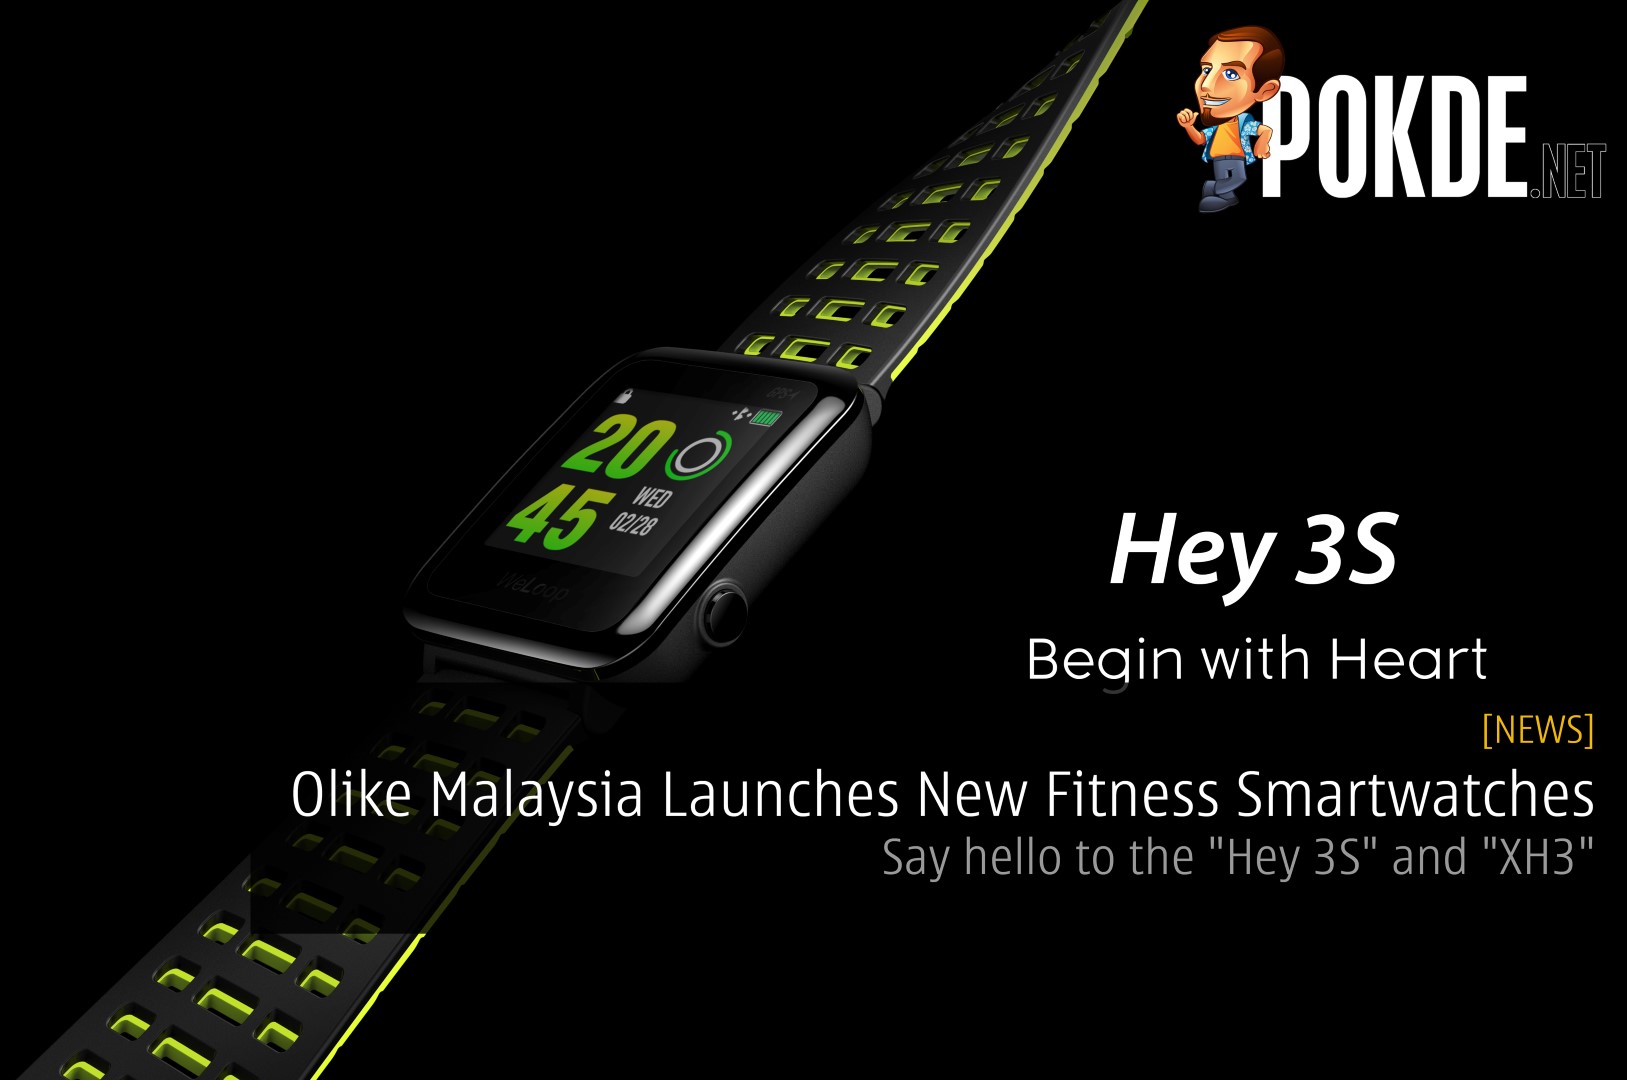 Olike Malaysia Launches New Sport-centric Smartwatches - Say hello to the "Hey 3S" and "XH3" 30